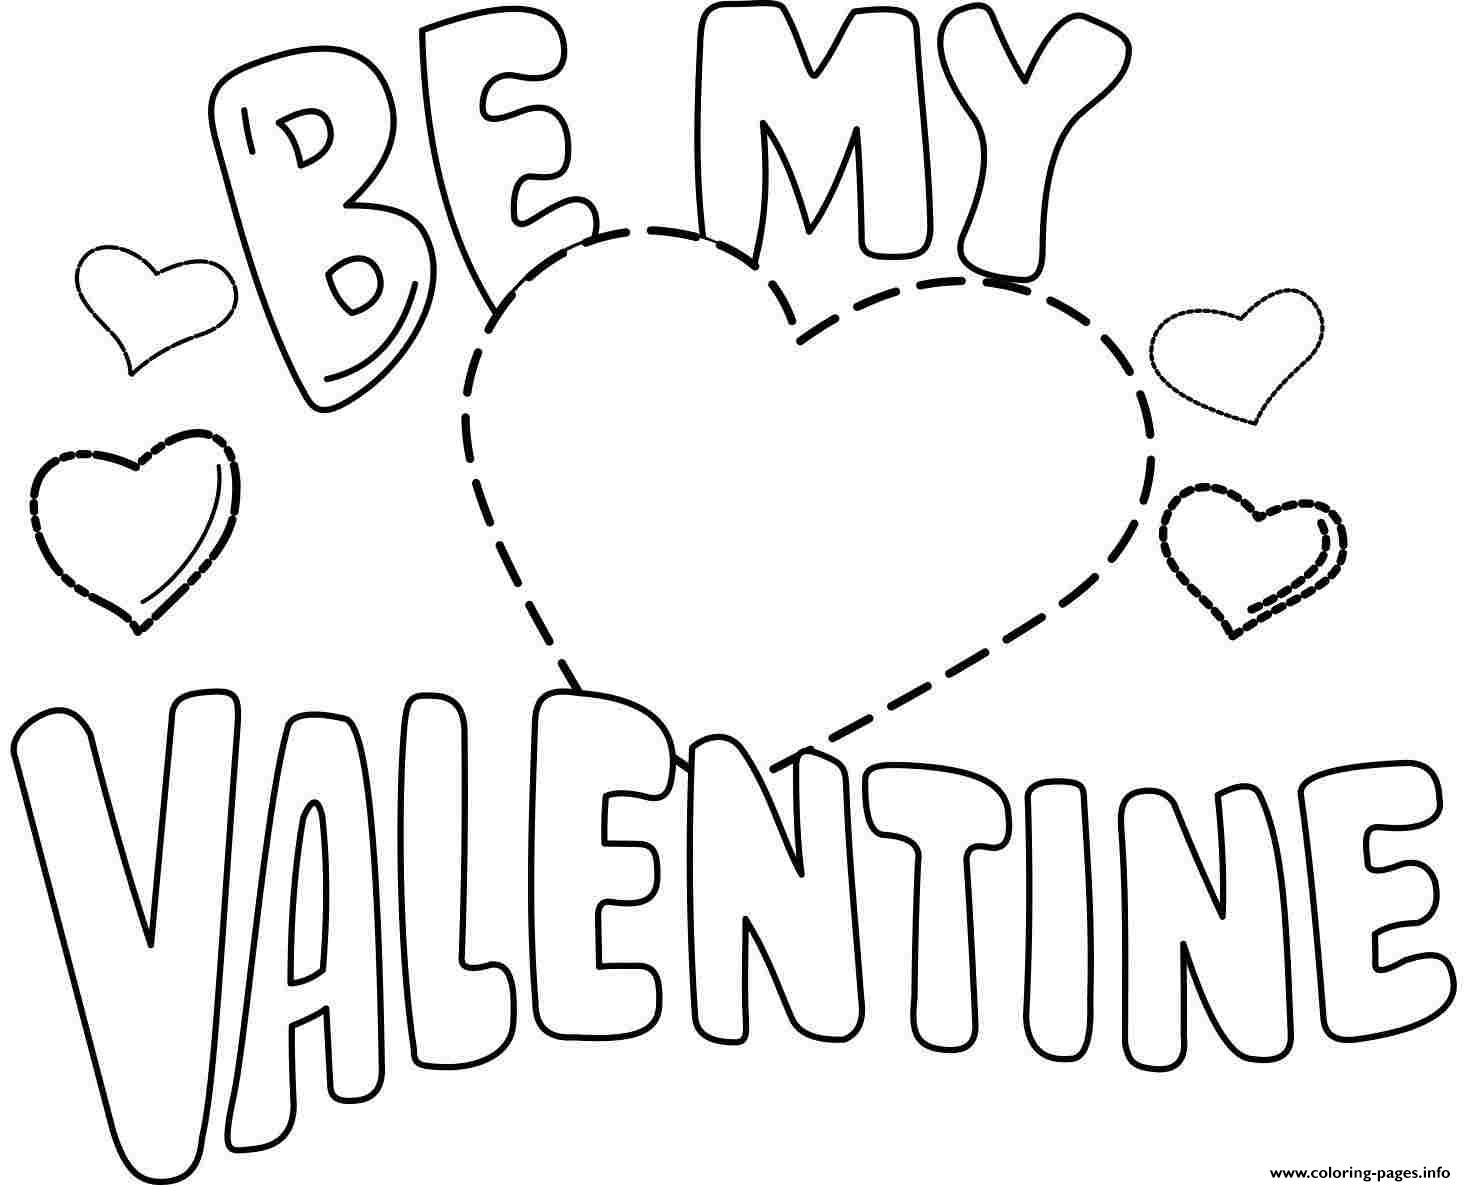 Preschool Valentines Day Coloring Pages Elegant Valentines Day Coloring Page 72 For Coloring Pages For Kids